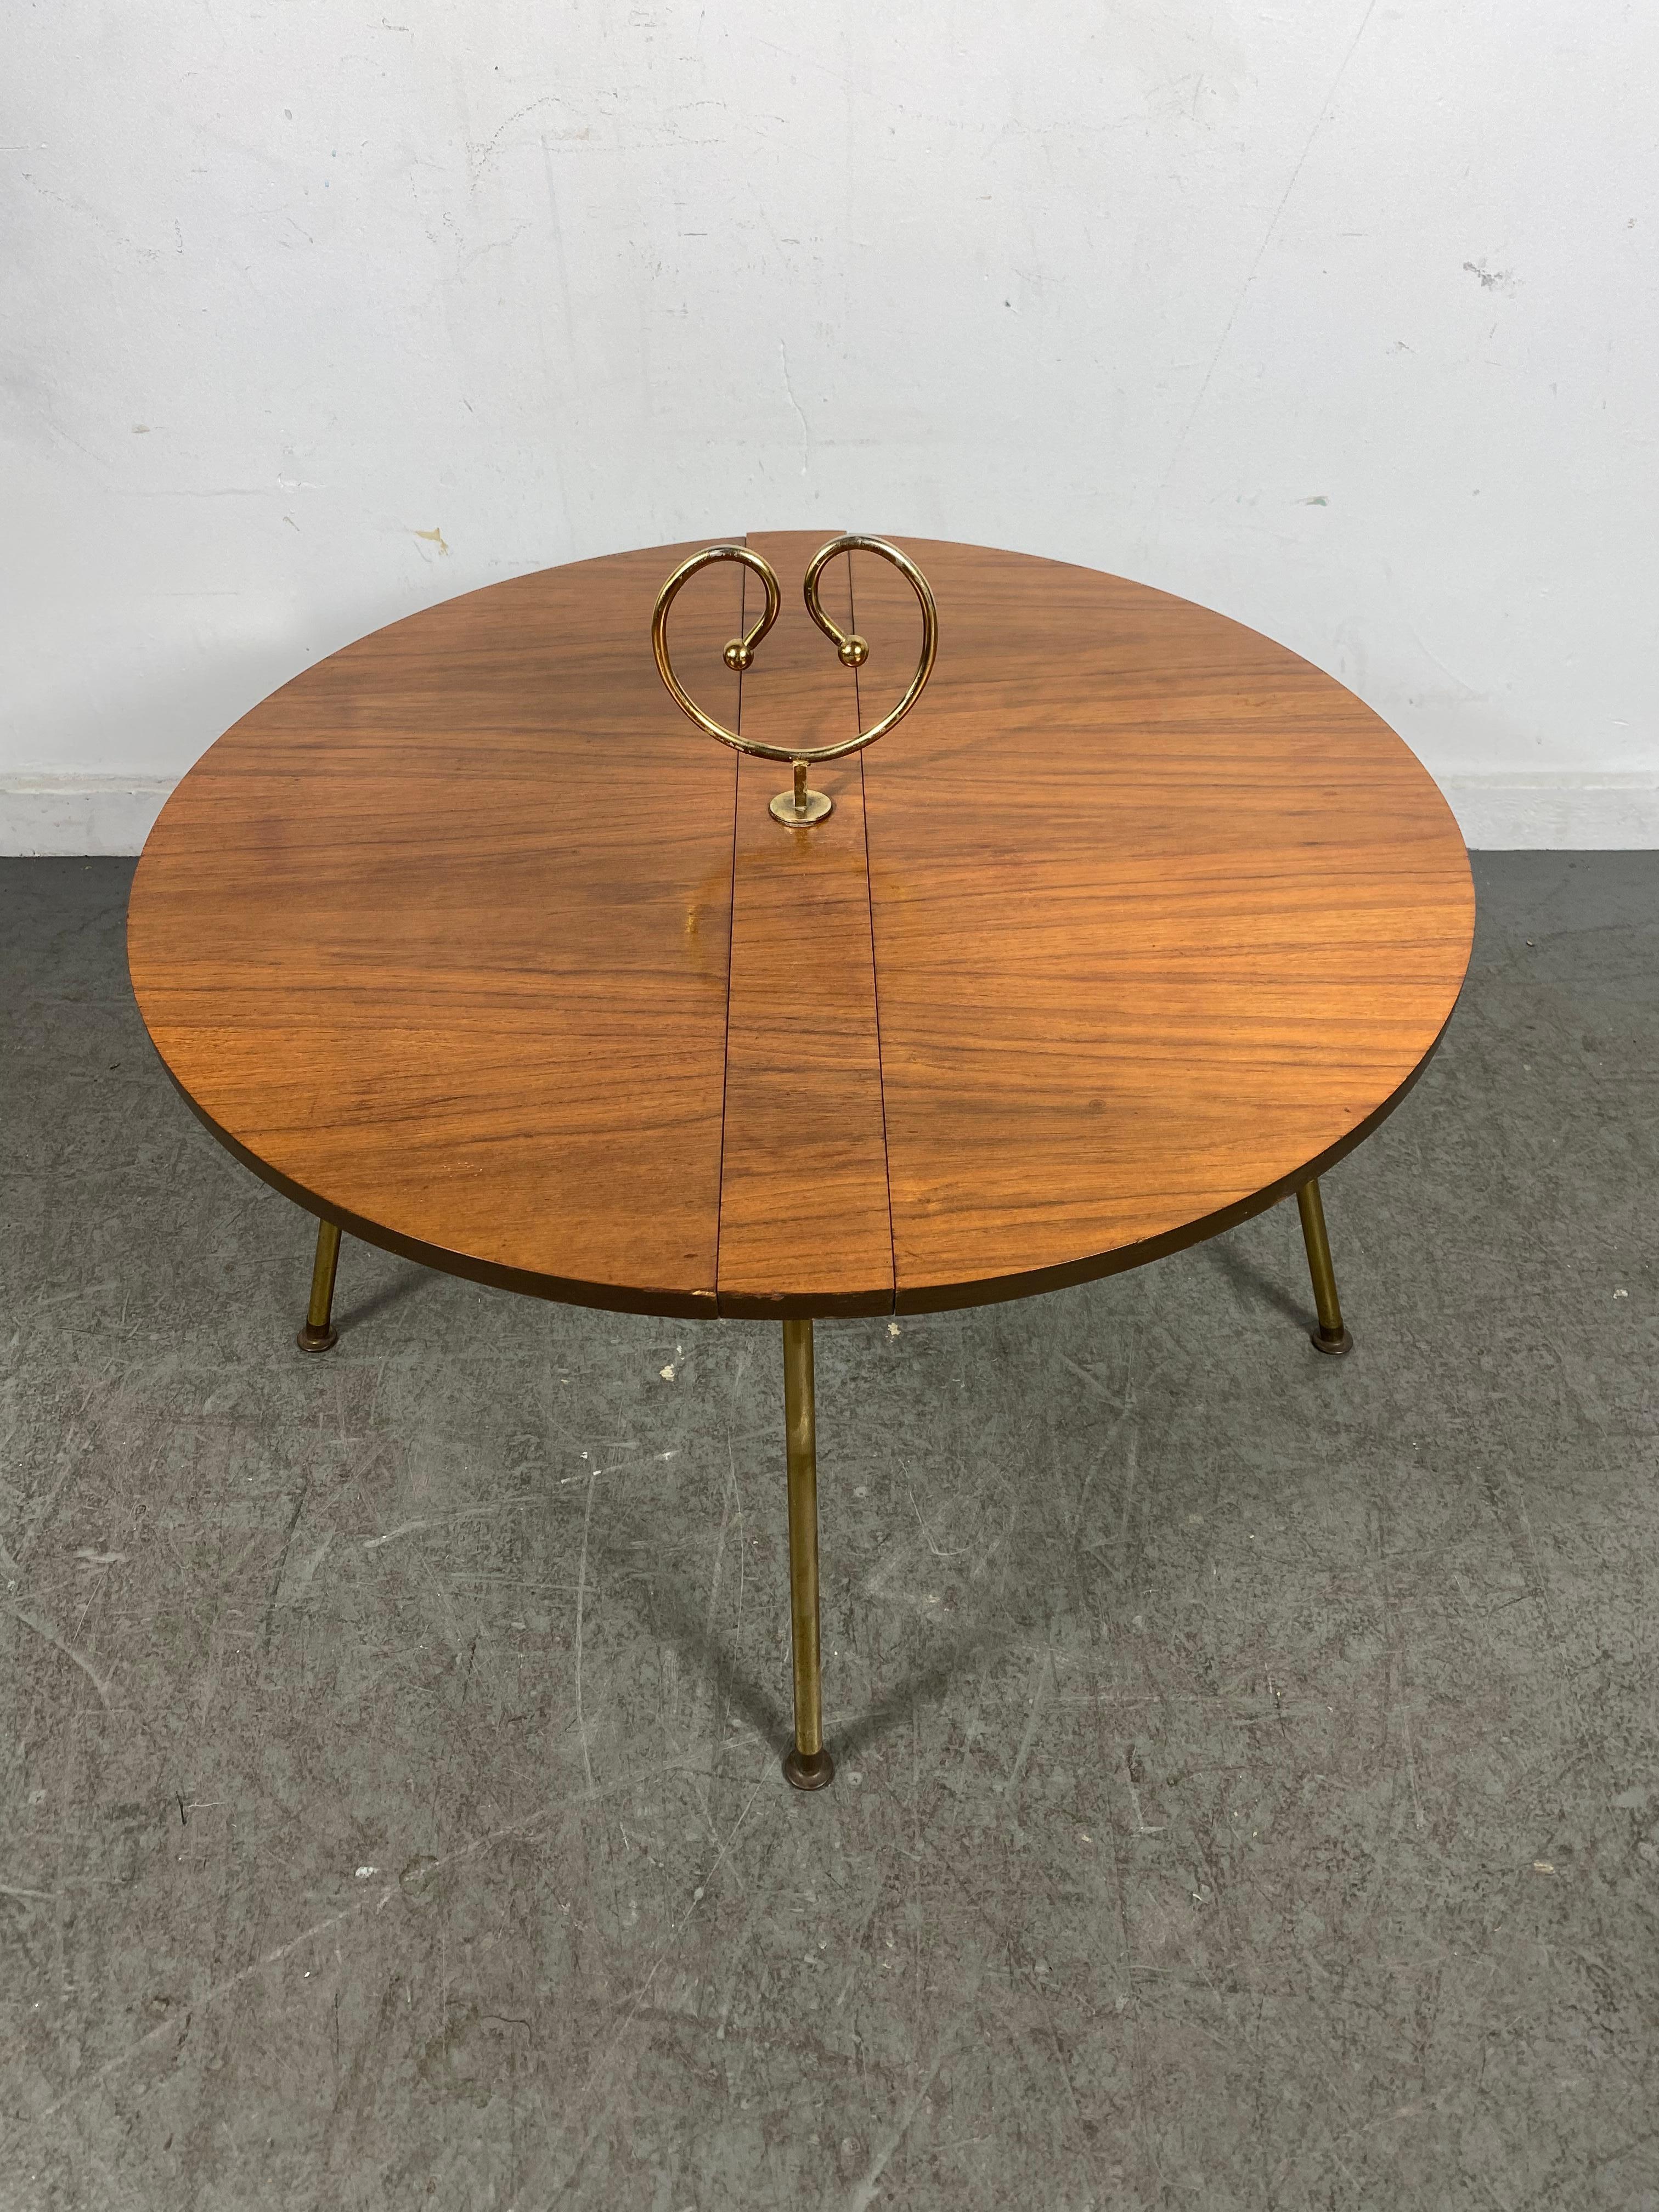 Unusual Modernist Collapsable Coffee/Cocktail Table, , Walnut & Brass In Good Condition For Sale In Buffalo, NY